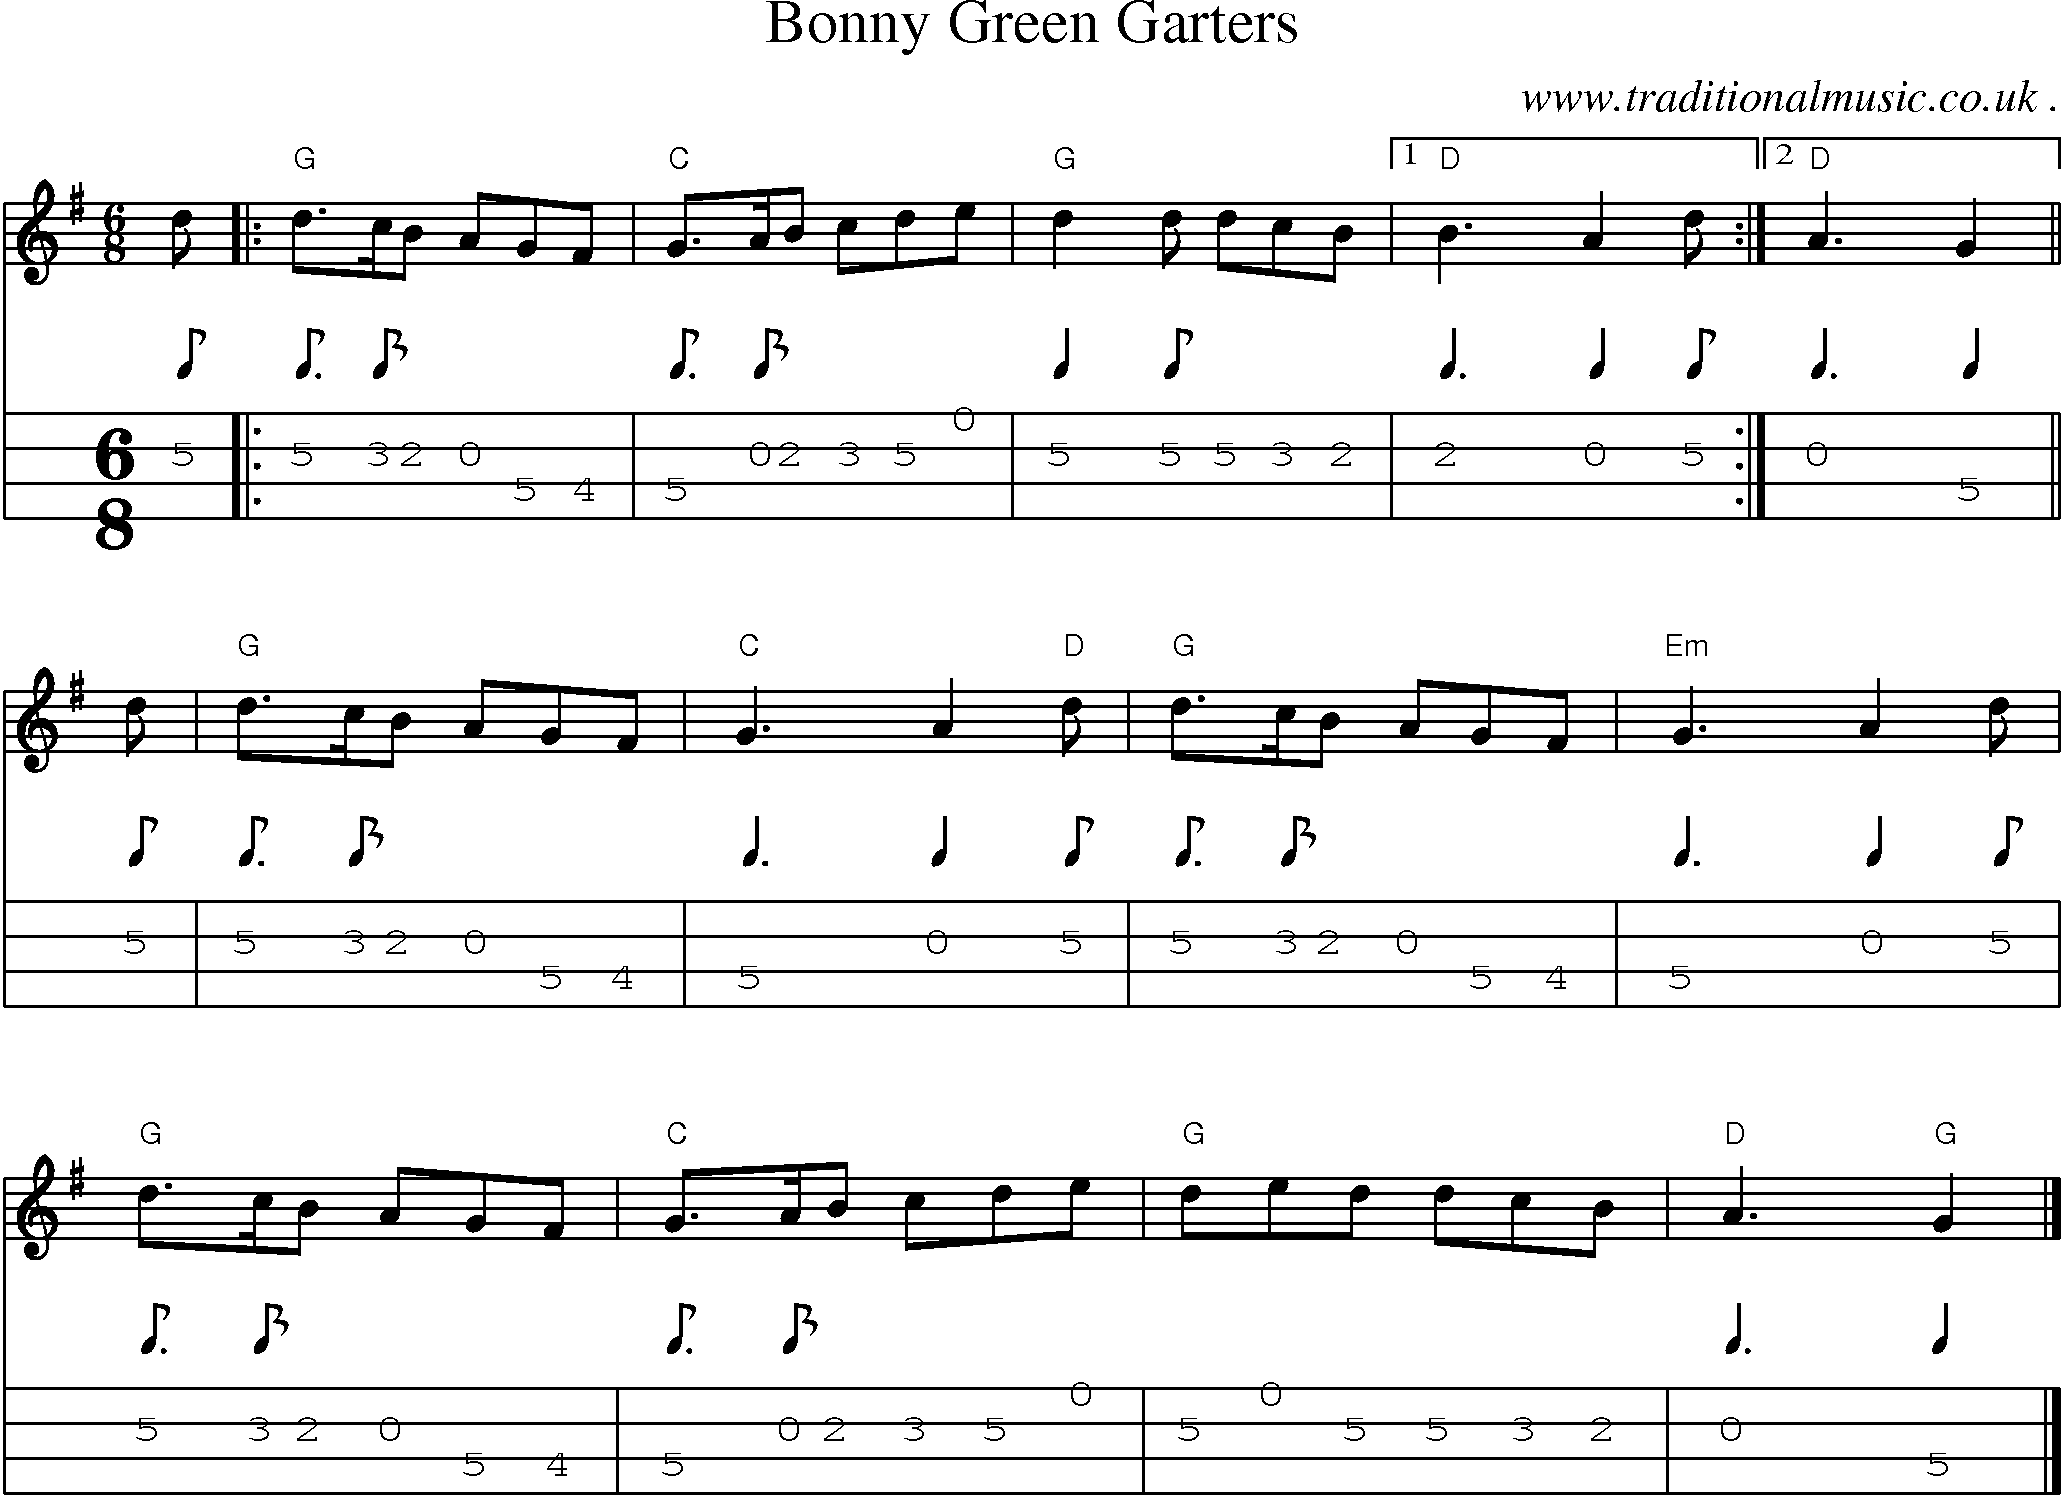 Music Score and Guitar Tabs for Bonny Green Garters